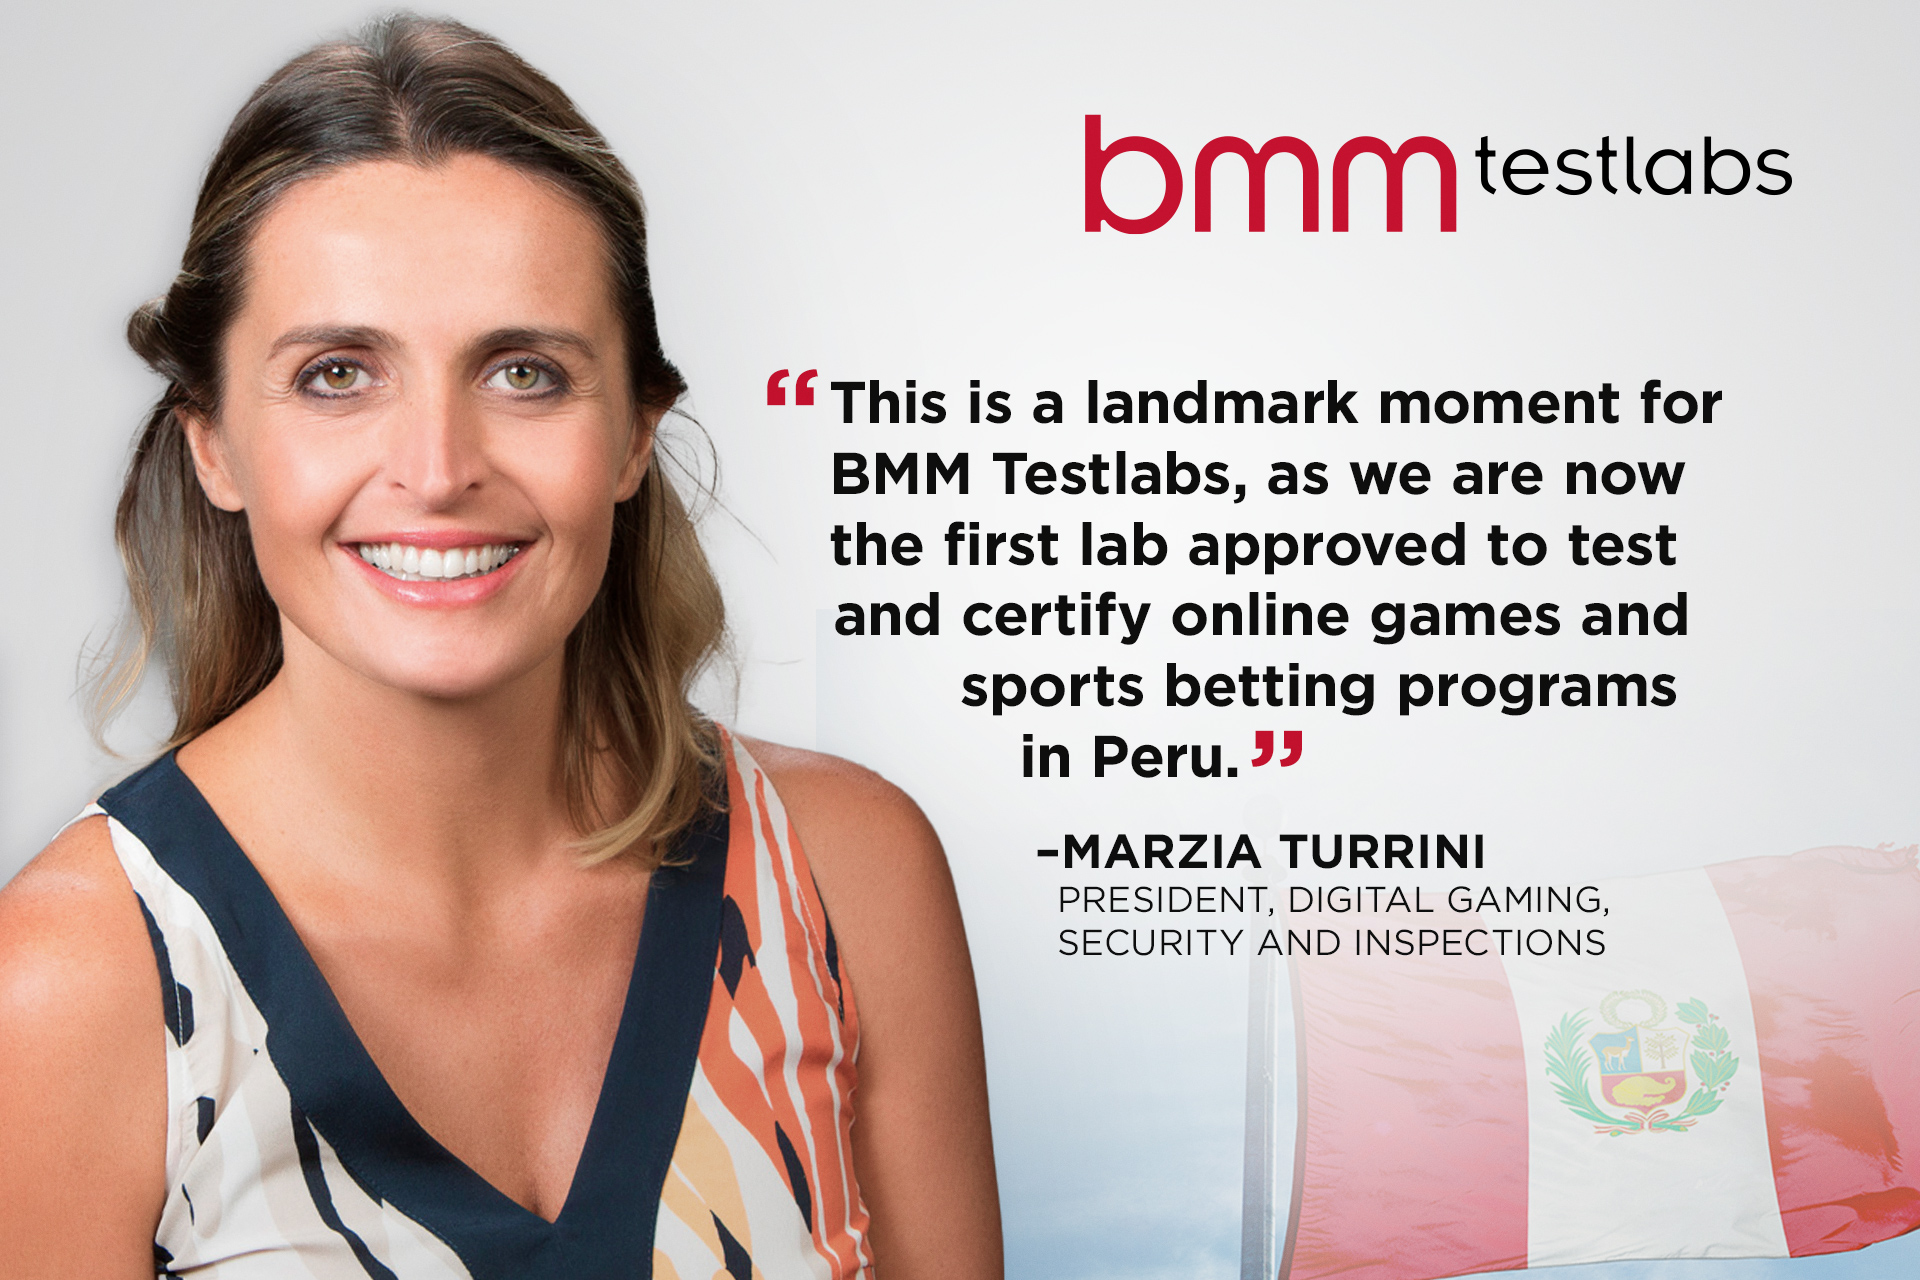 In Groundbreaking News, BMM Testlabs Becomes First Testing and Certification Lab to Receive Approval For Peru’s Newly Regulated iGaming and Sports Betting Market